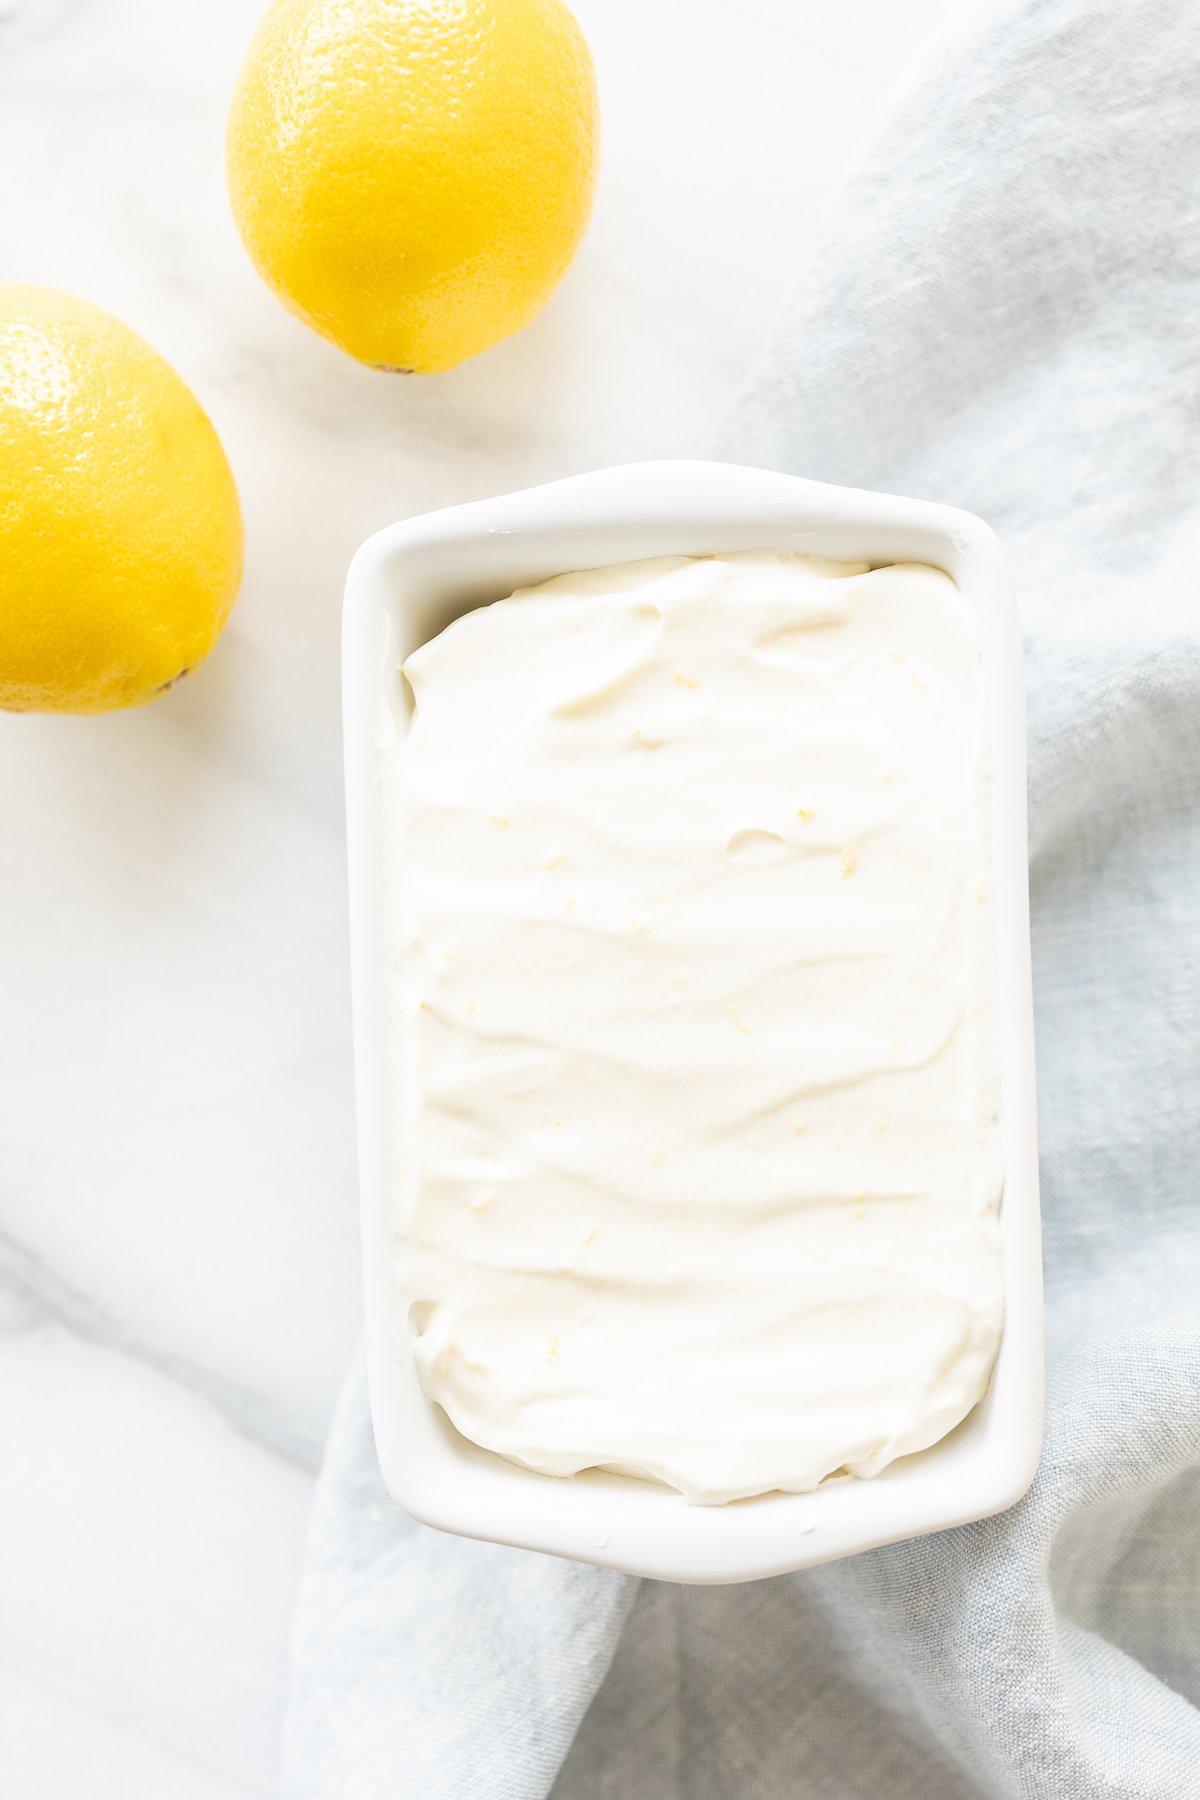 Lemon ice cream in a ceramic mini loaf pan, with fresh lemons to the side.